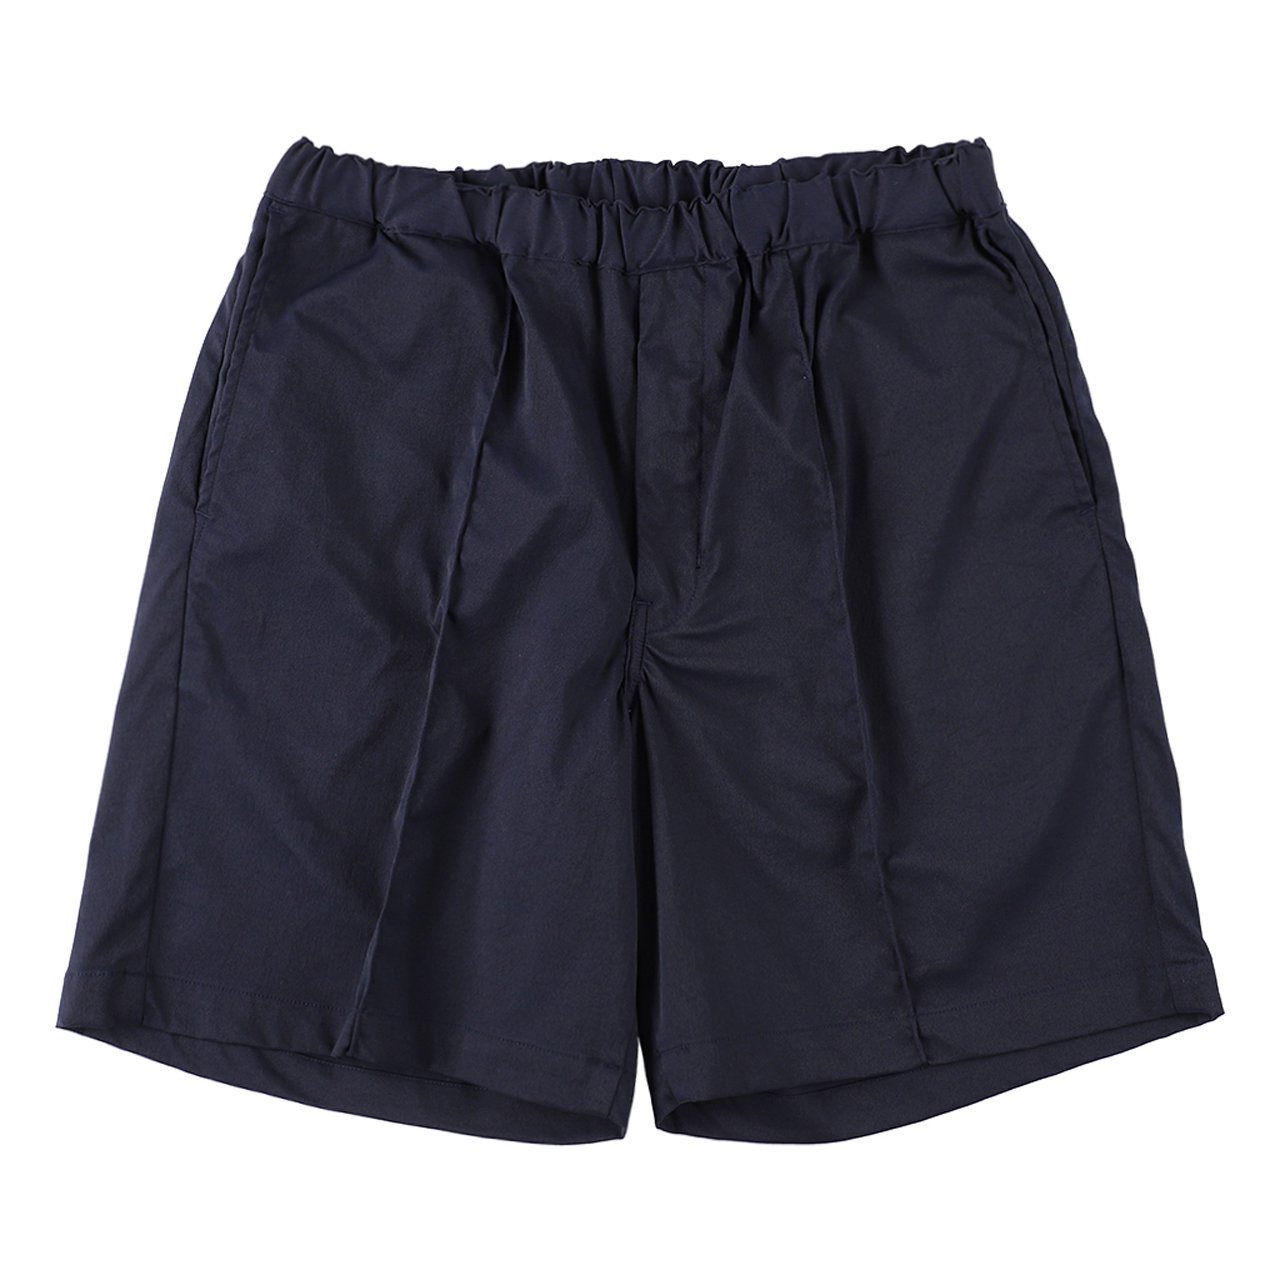 <img class='new_mark_img1' src='https://img.shop-pro.jp/img/new/icons5.gif' style='border:none;display:inline;margin:0px;padding:0px;width:auto;' />STANDARD CALIFORNIA ( ե˥)Easy Work Shorts Navy